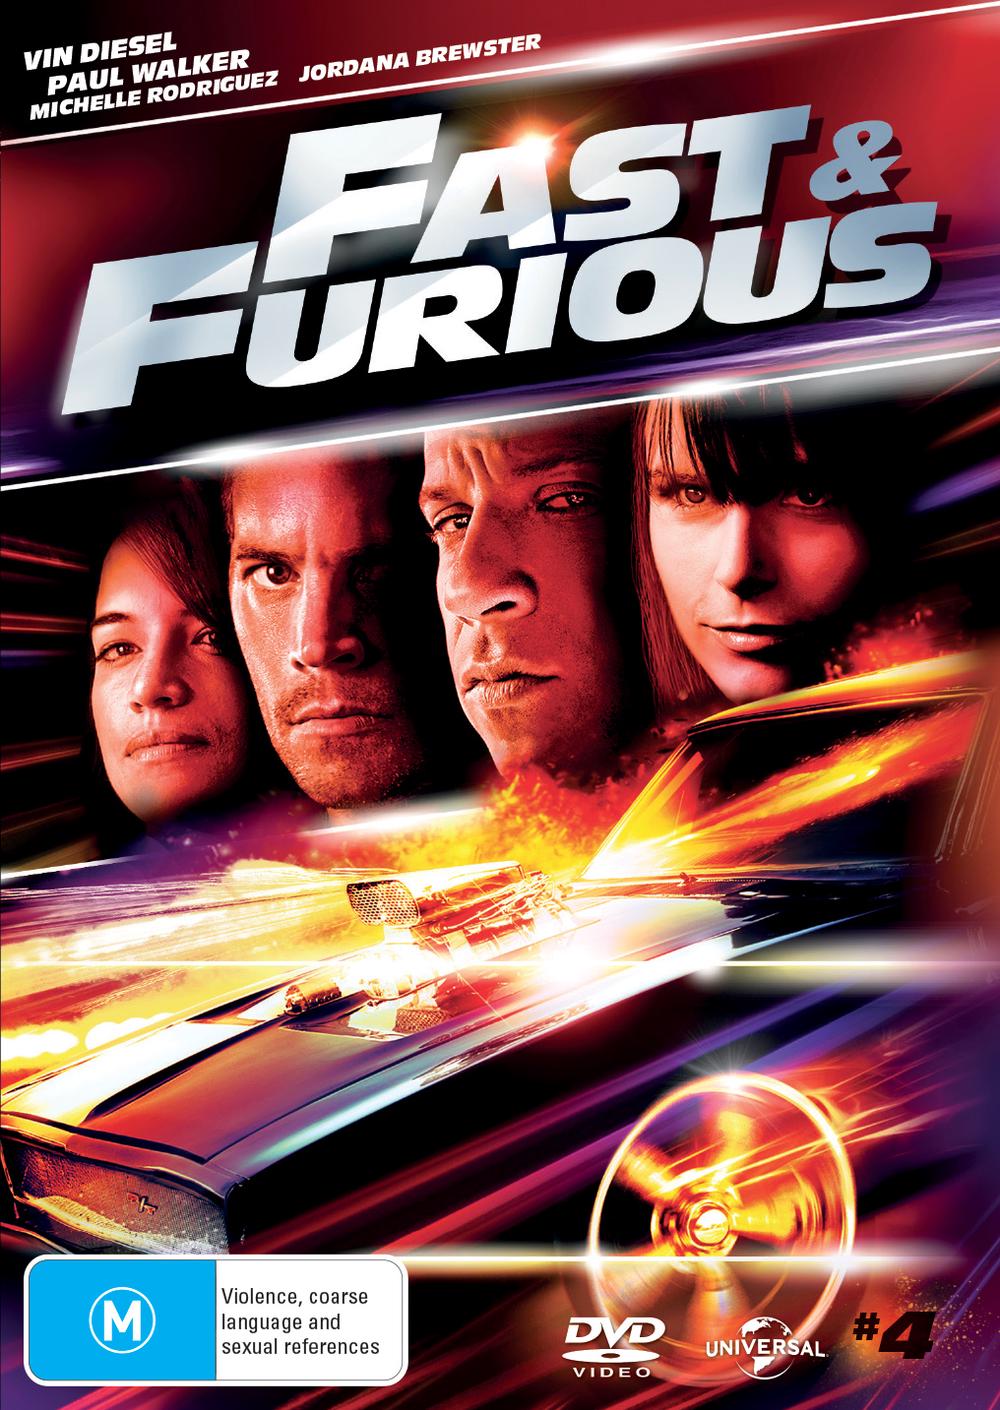 watch fast and furious 4 free online